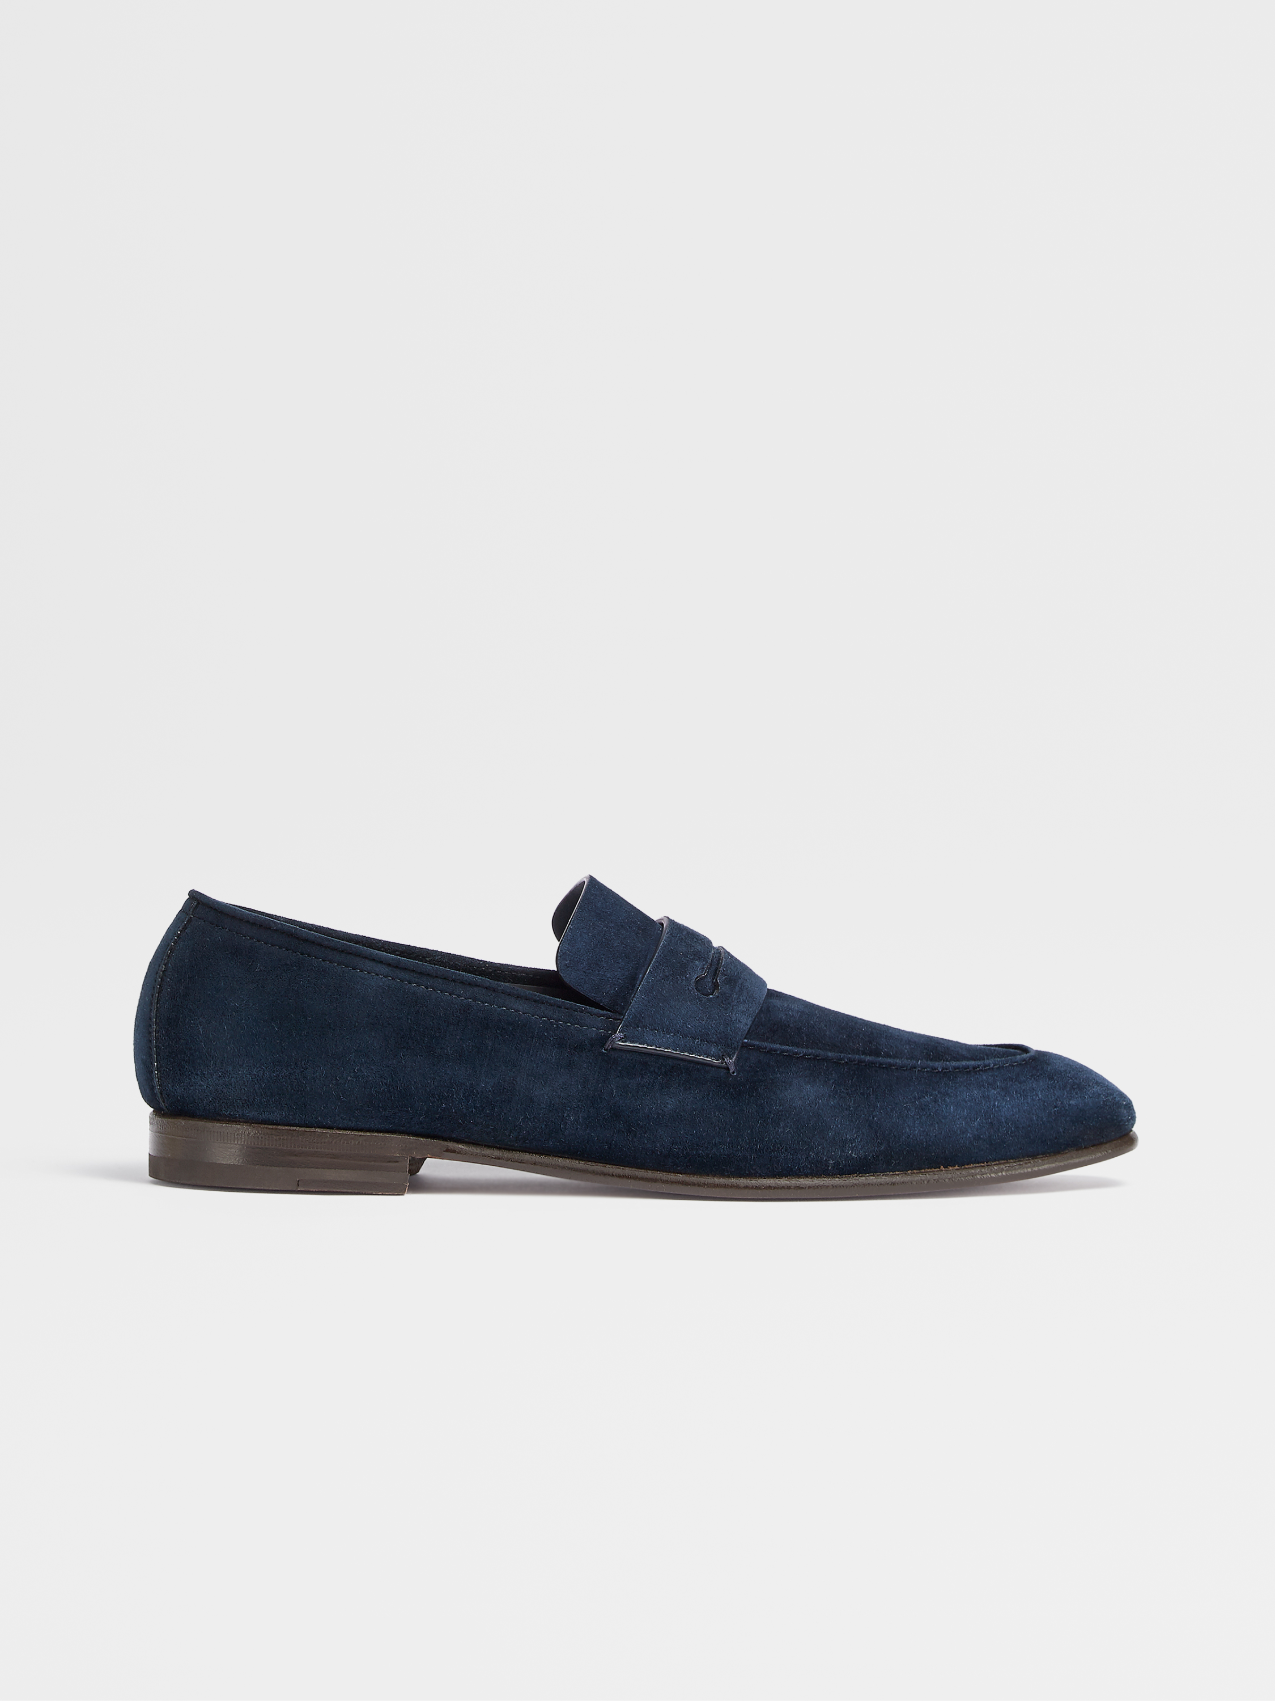 Navy Blue Suede Loafers FW23 22122810 Zegna